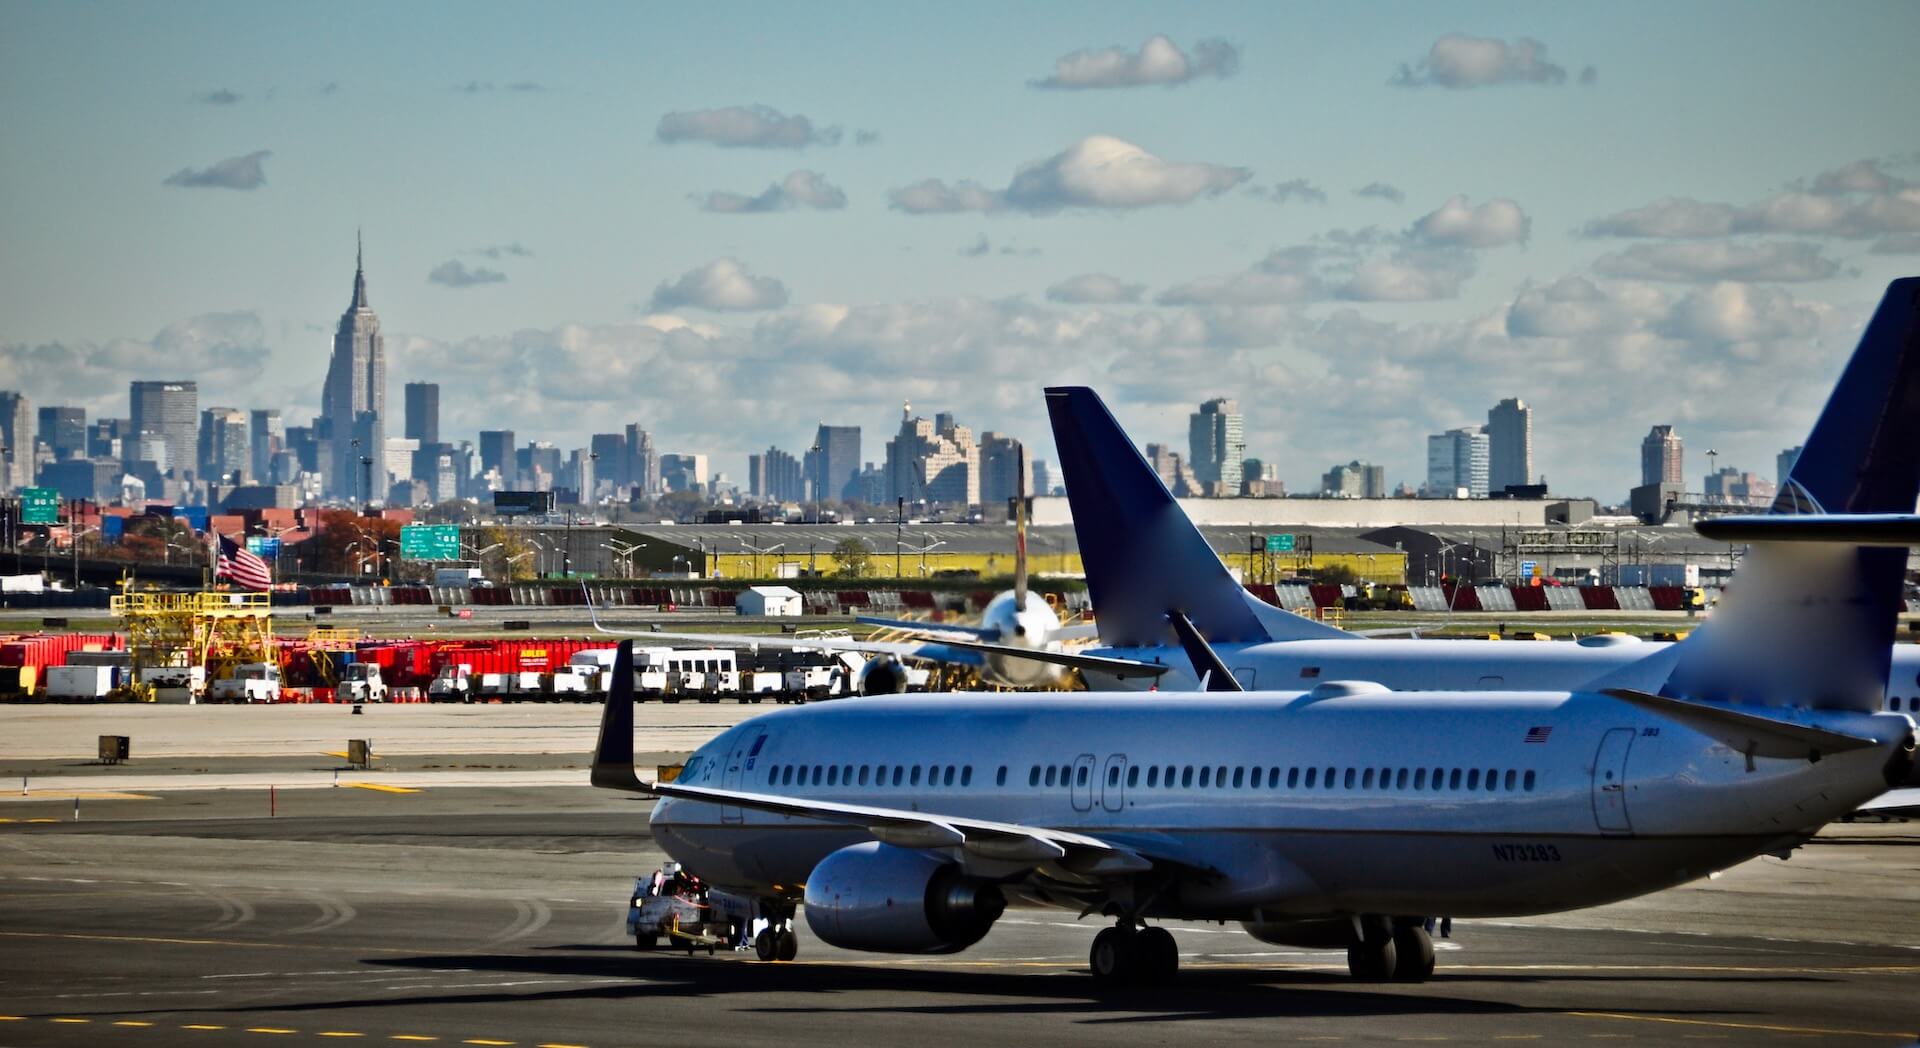 An airplane on the runway and Manhattan in the distance